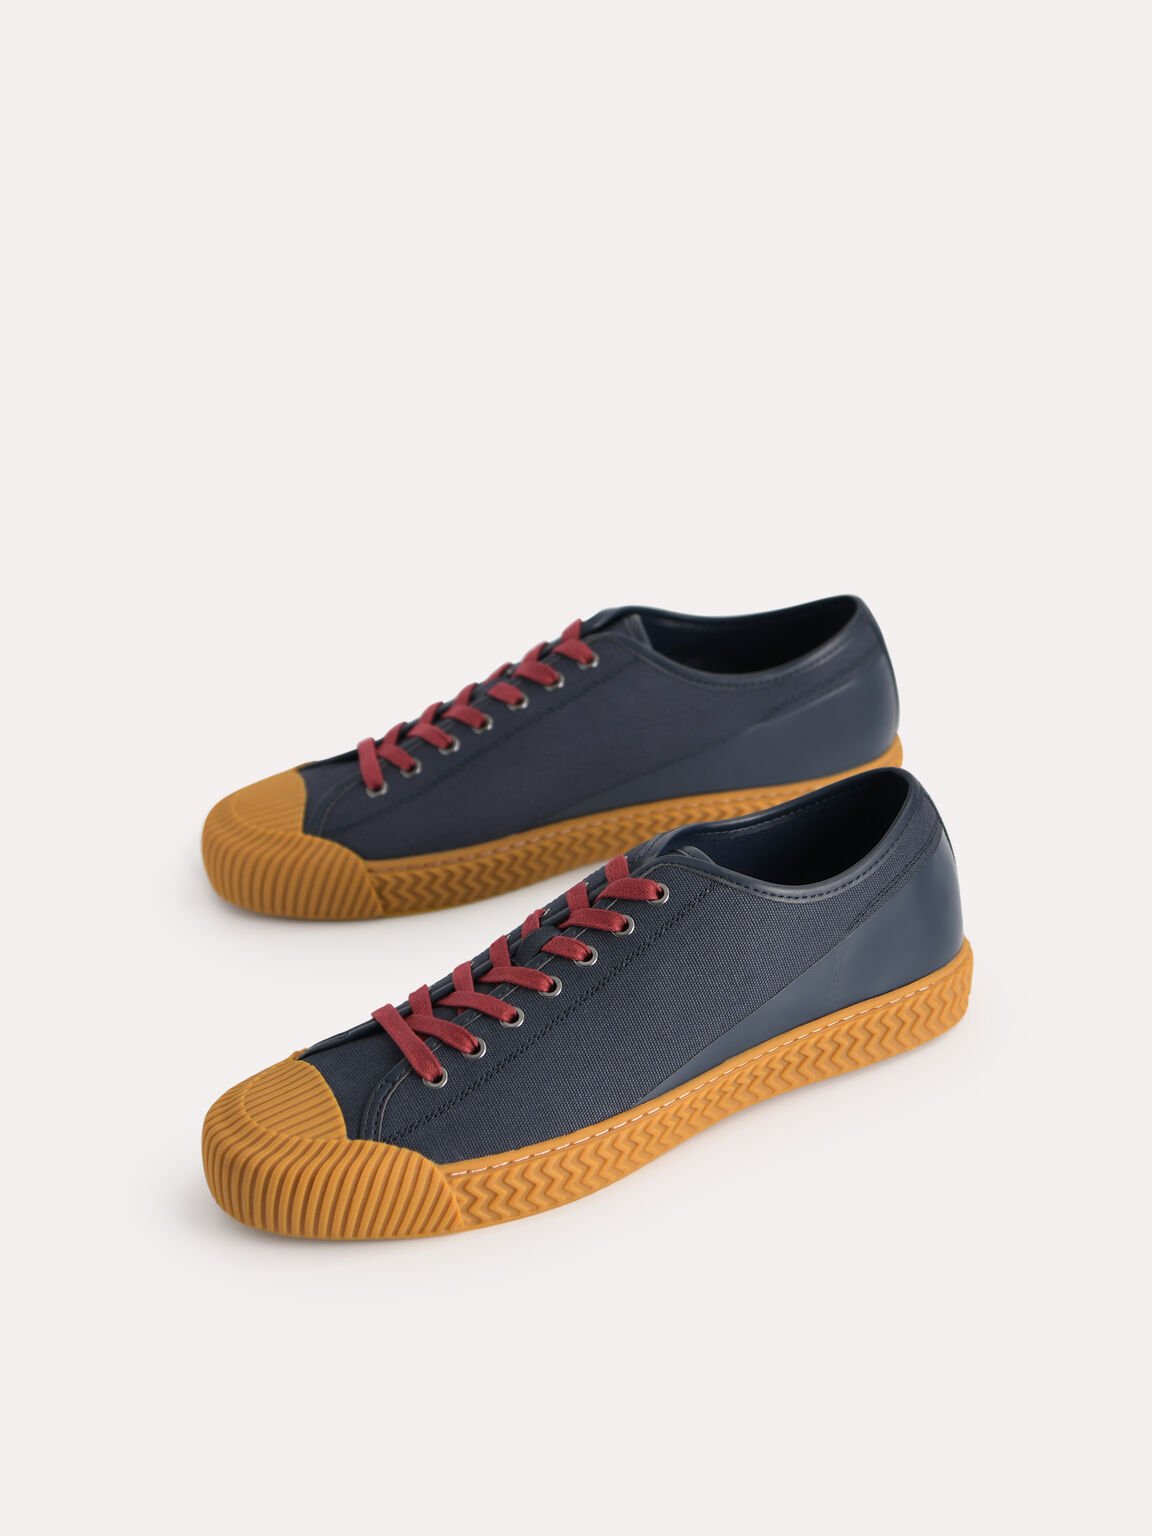 rePEDRO Lace-up Sneaker, Navy